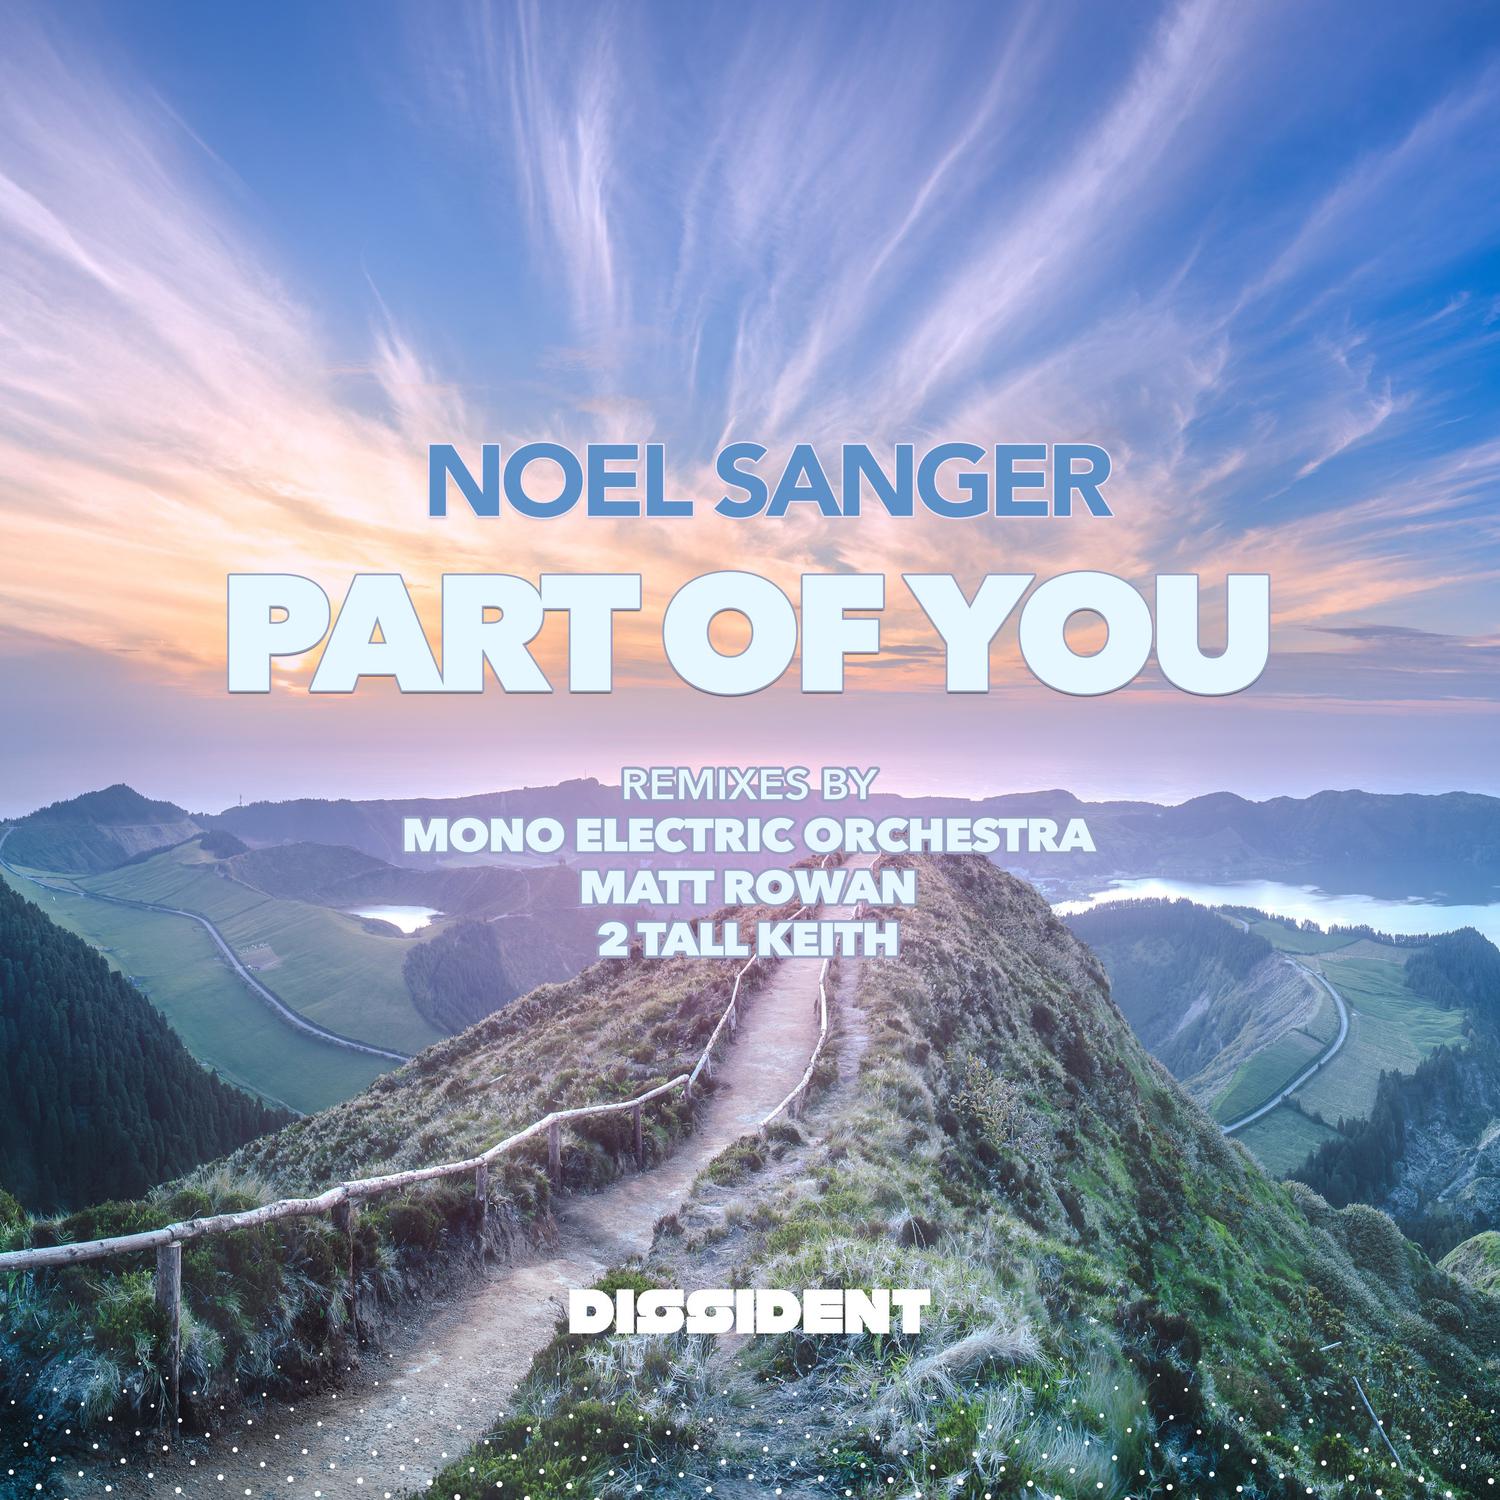 Noel Sanger - Part of You (Mono Electric Orchestra Remix)